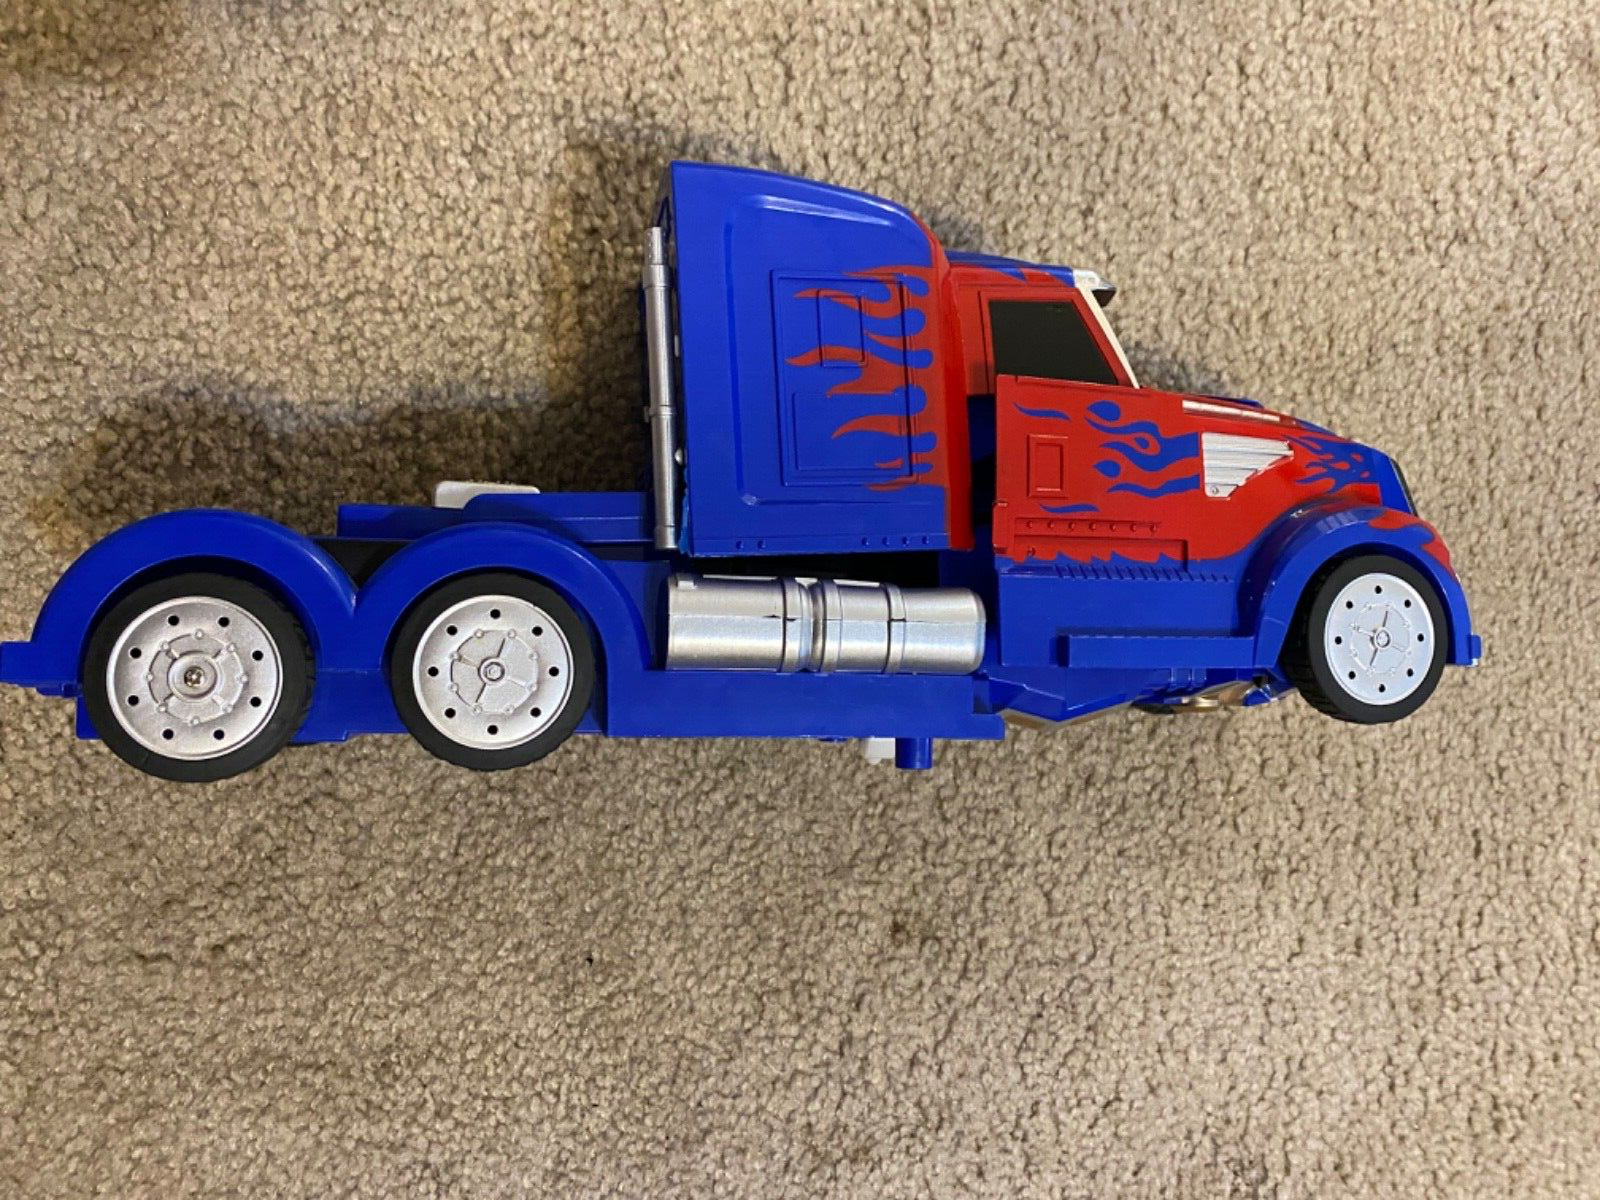 Transformers OPTIMUS PRIME Semi-Truck 1/14 Family Smiles RC Toy - CAR ONLY - $18.49